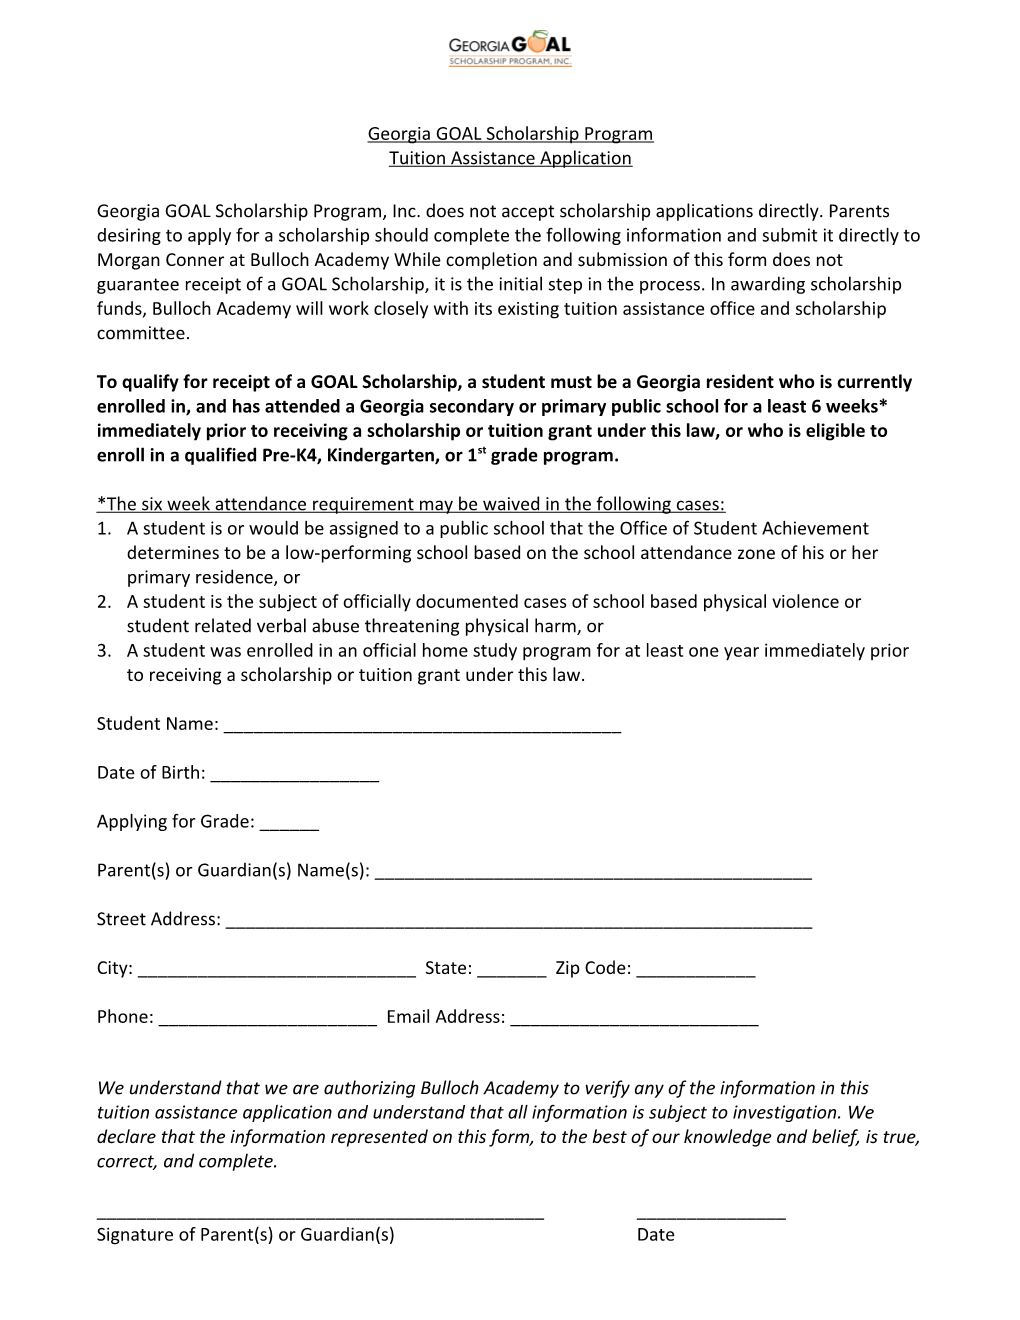 Tuition Assistance Application